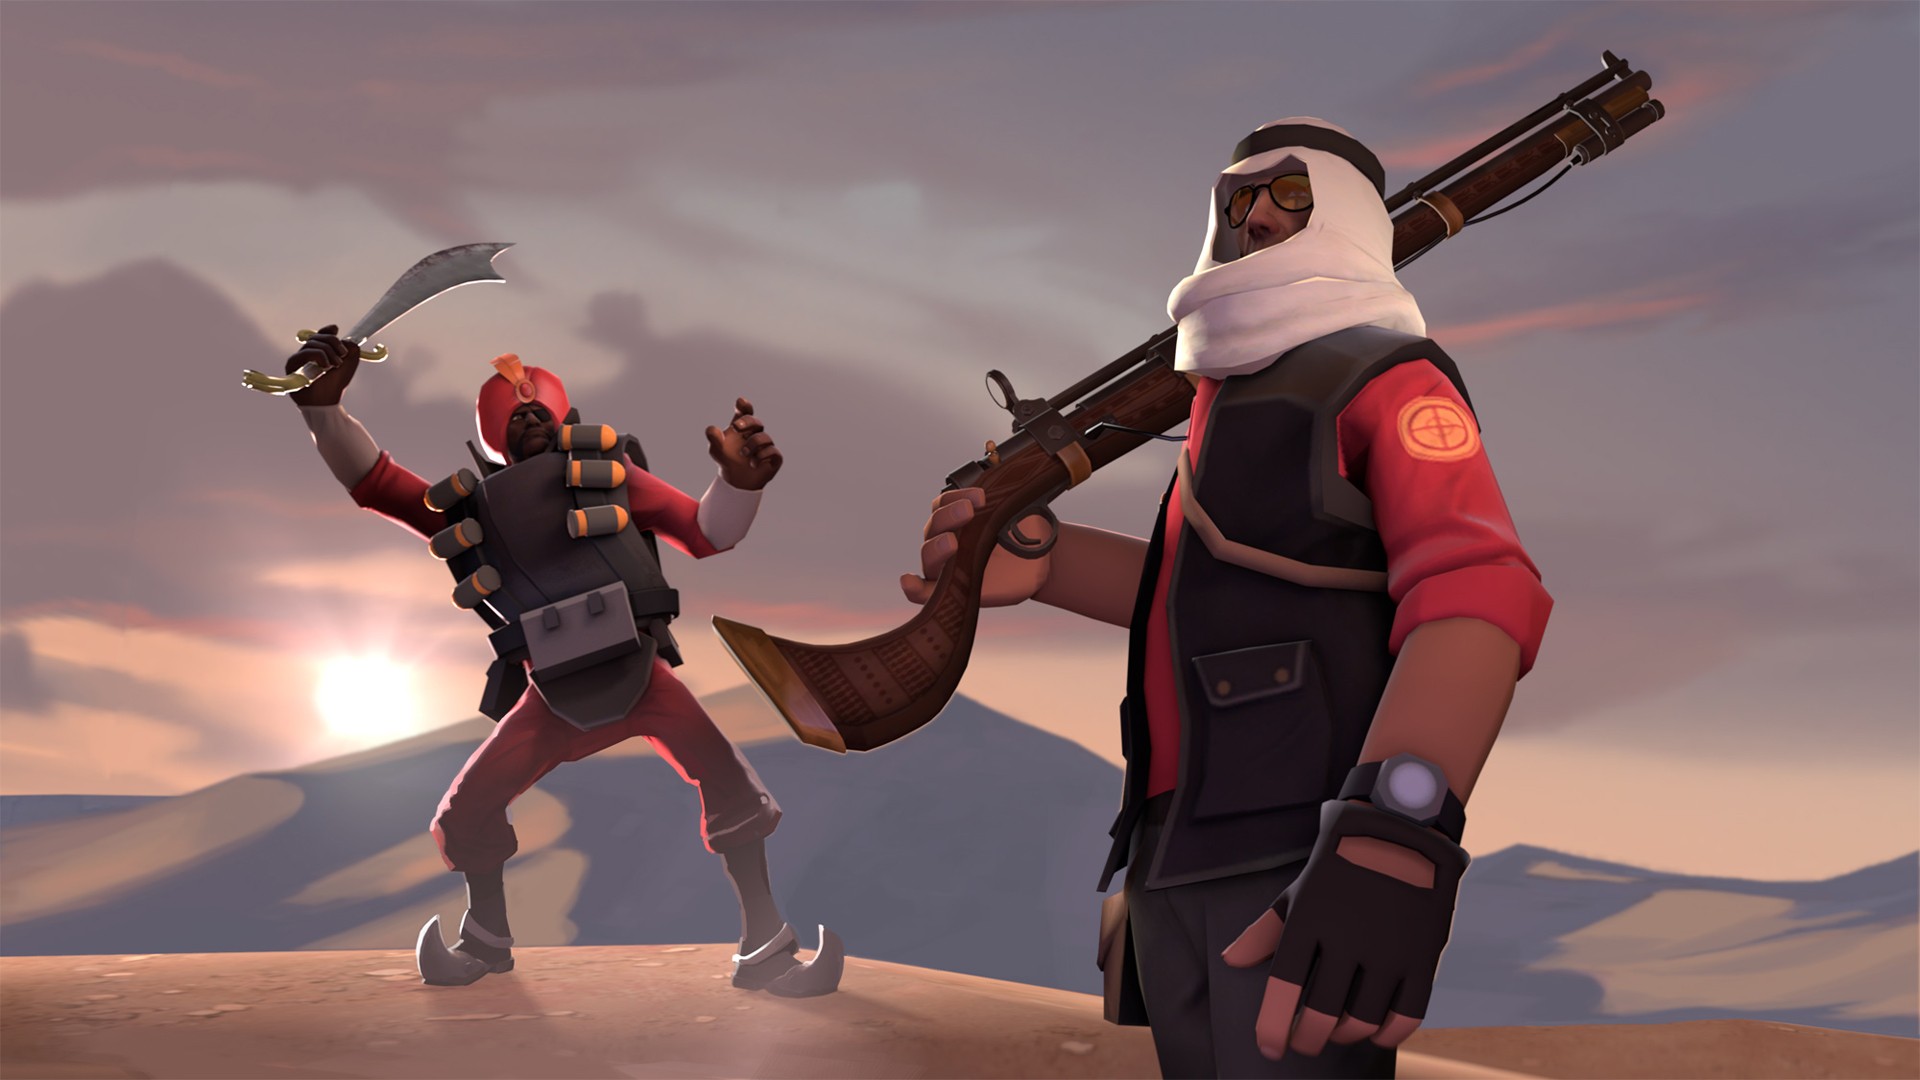 General 1920x1080 video games Team Fortress 2 Sniper (TF2) Demoman PC gaming 2007 (Year) Valve Corporation